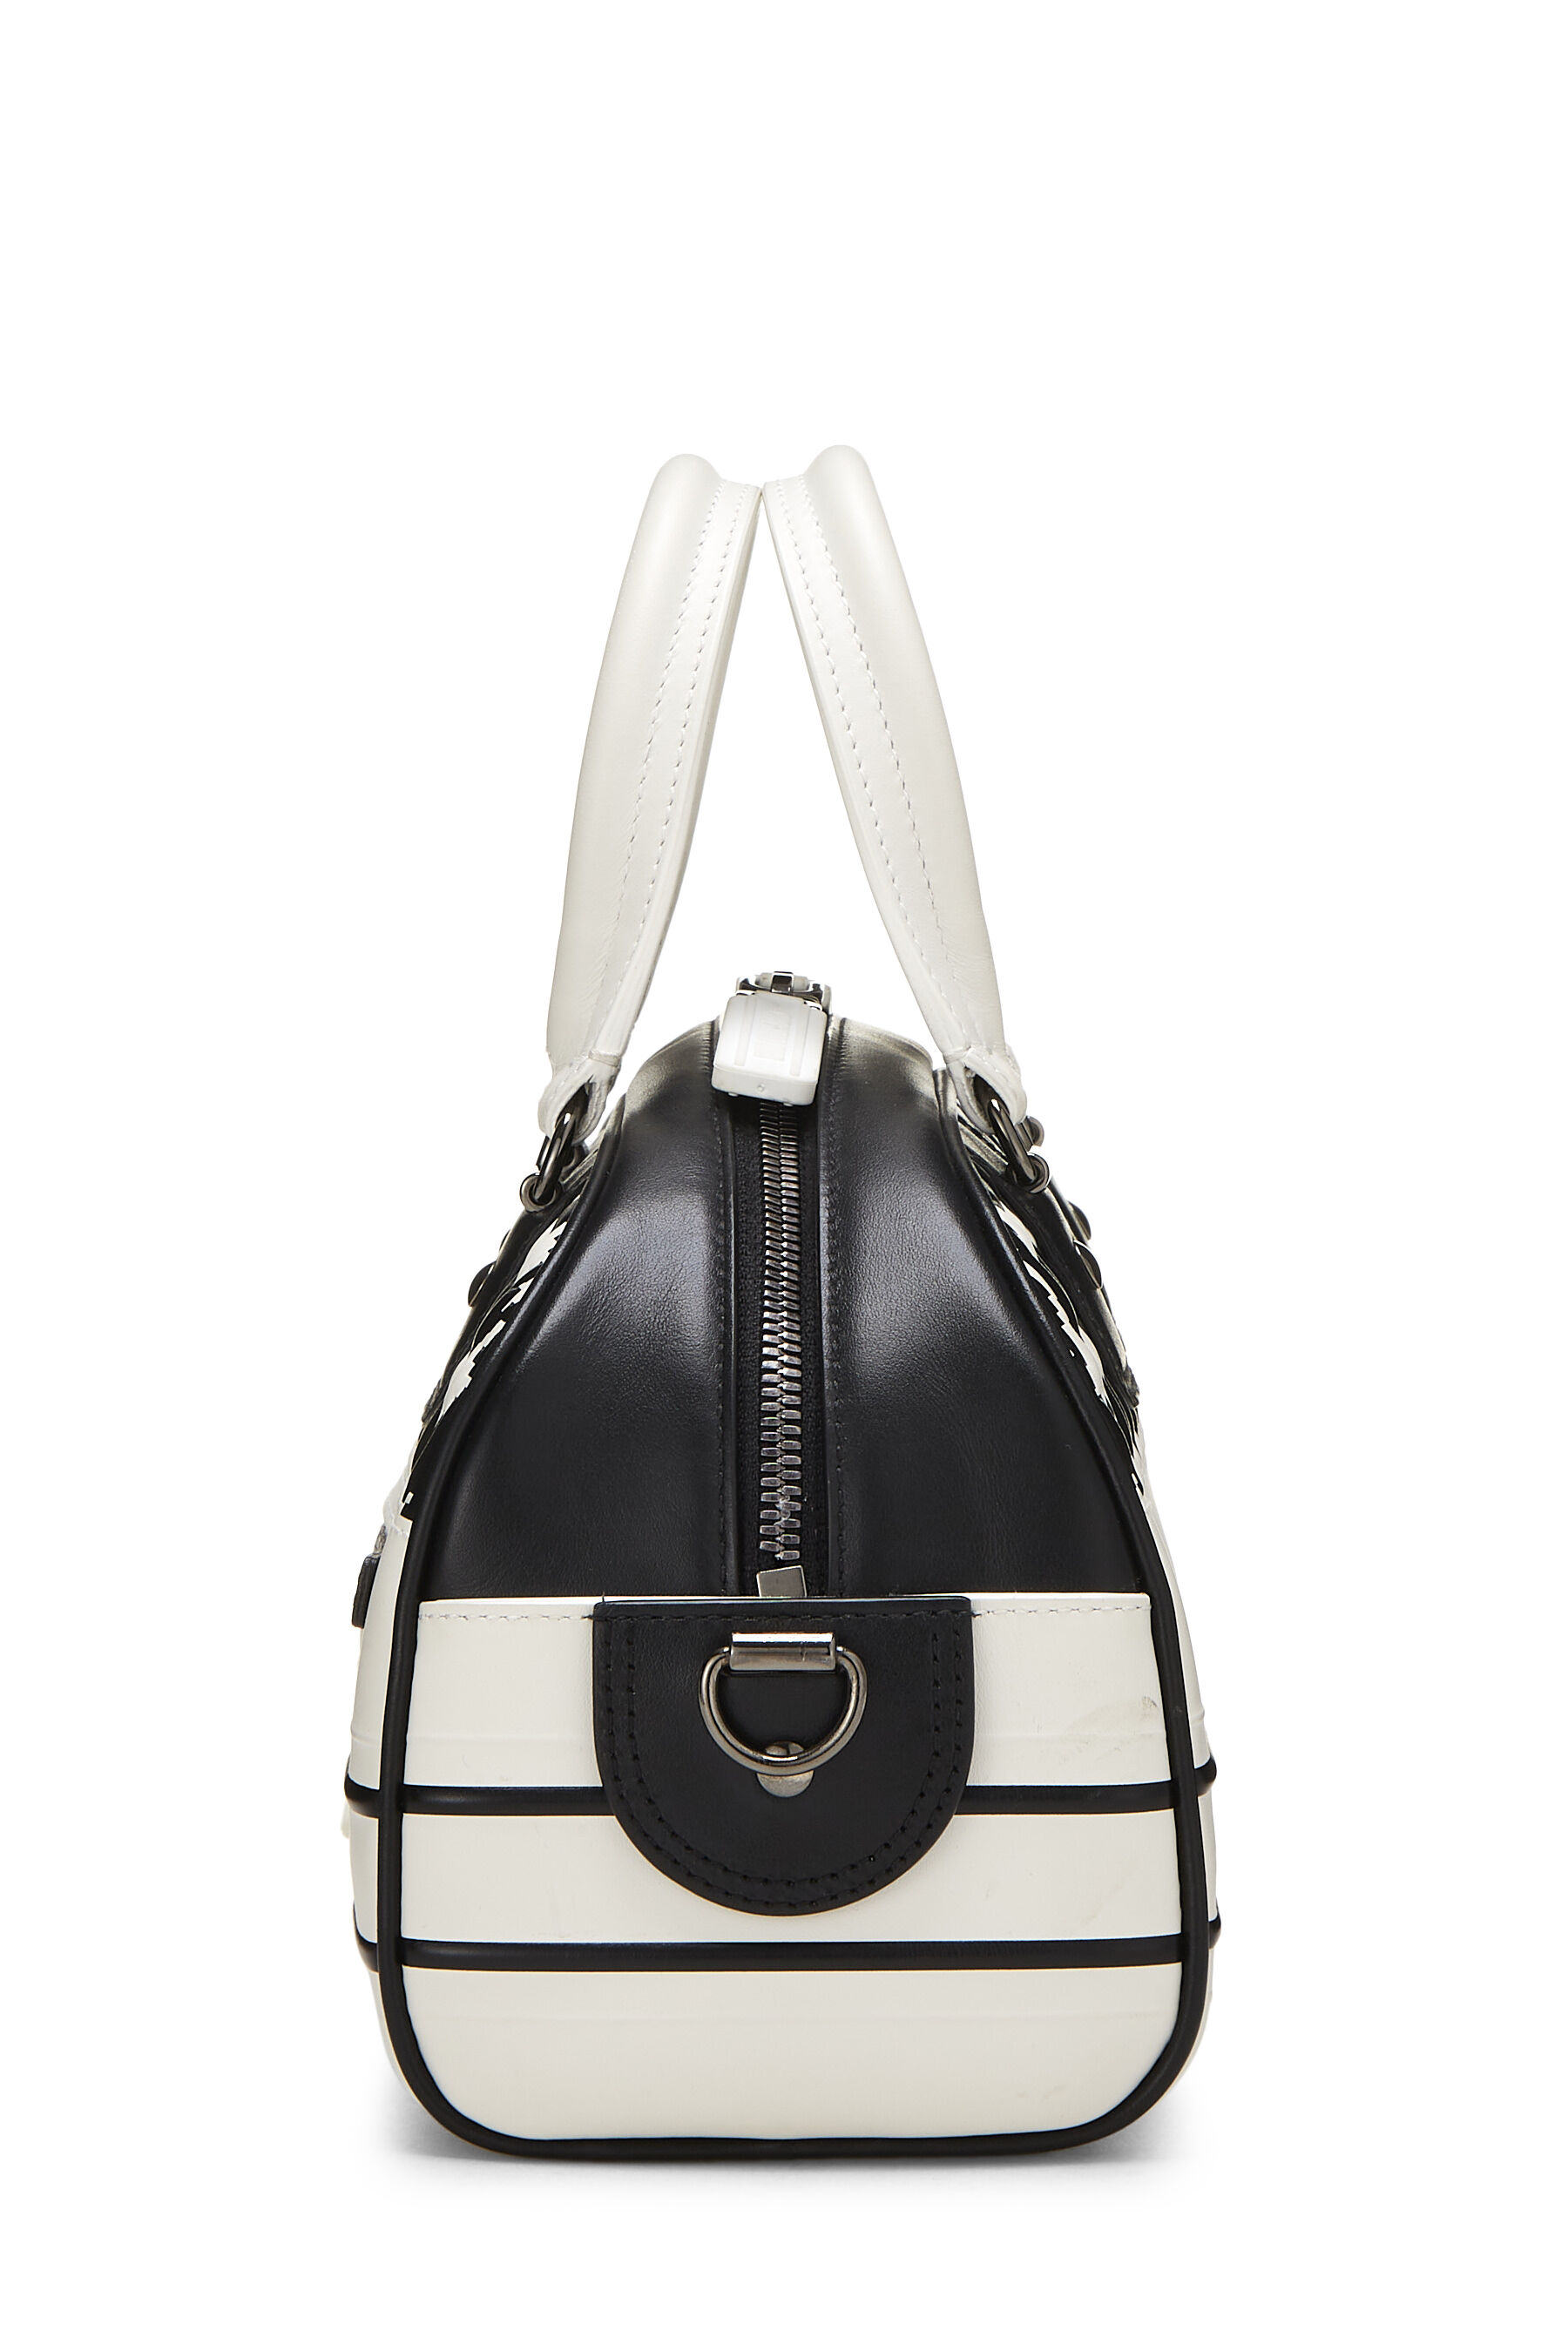 White & Black Leather Vibe Bowling Bag Small